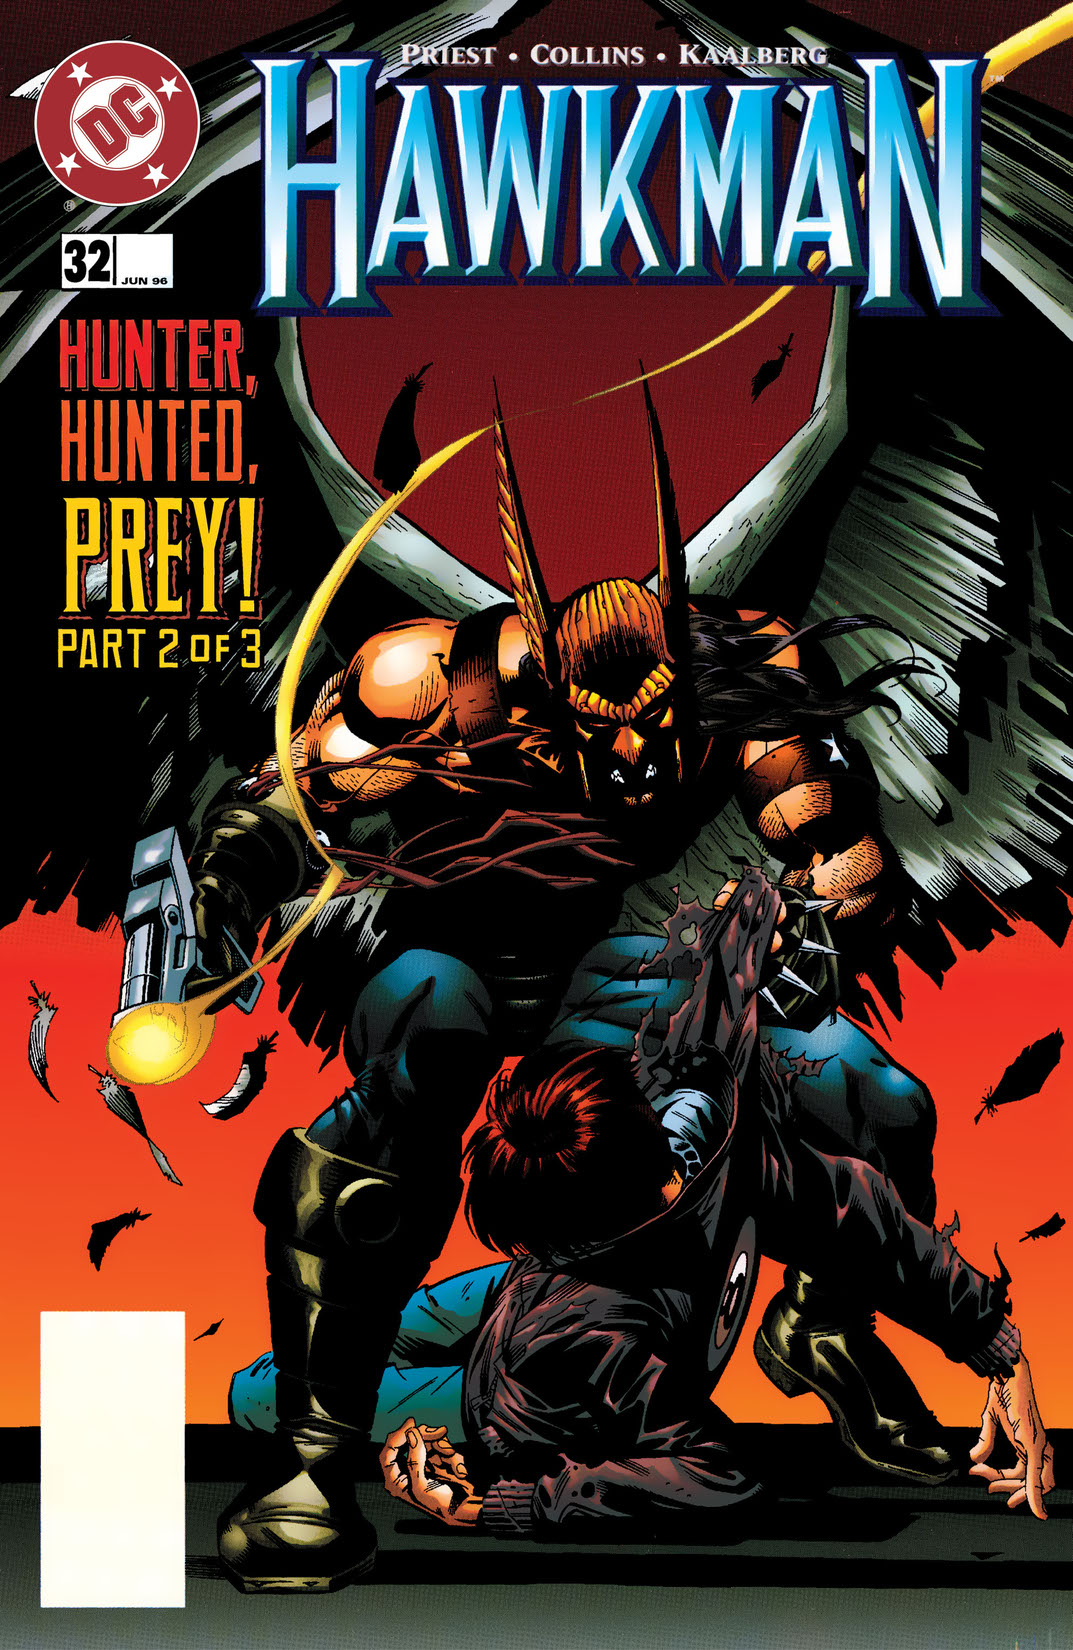 Hawkman (1993-1996) #32 preview images